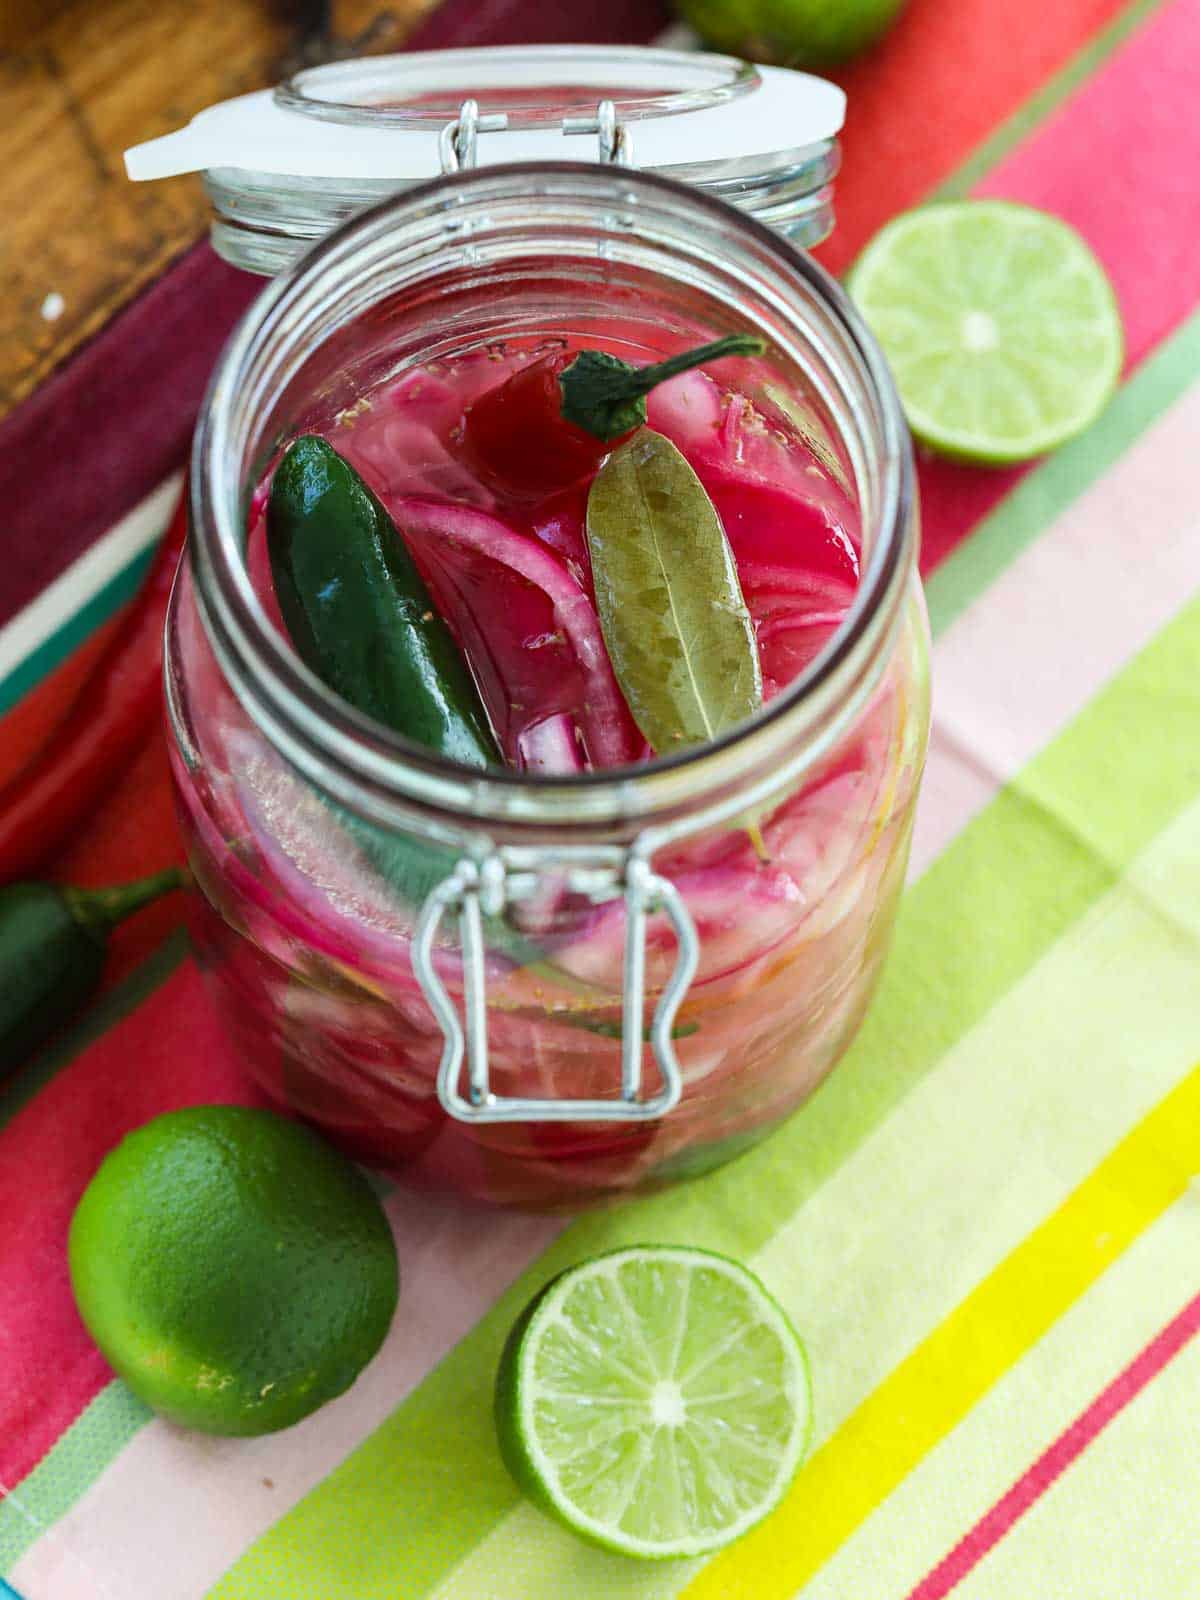 https://www.delicioustable.com/wp-content/uploads/2022/04/Mexican-Pickled-Red-Onions-with-bay-leaf.jpg